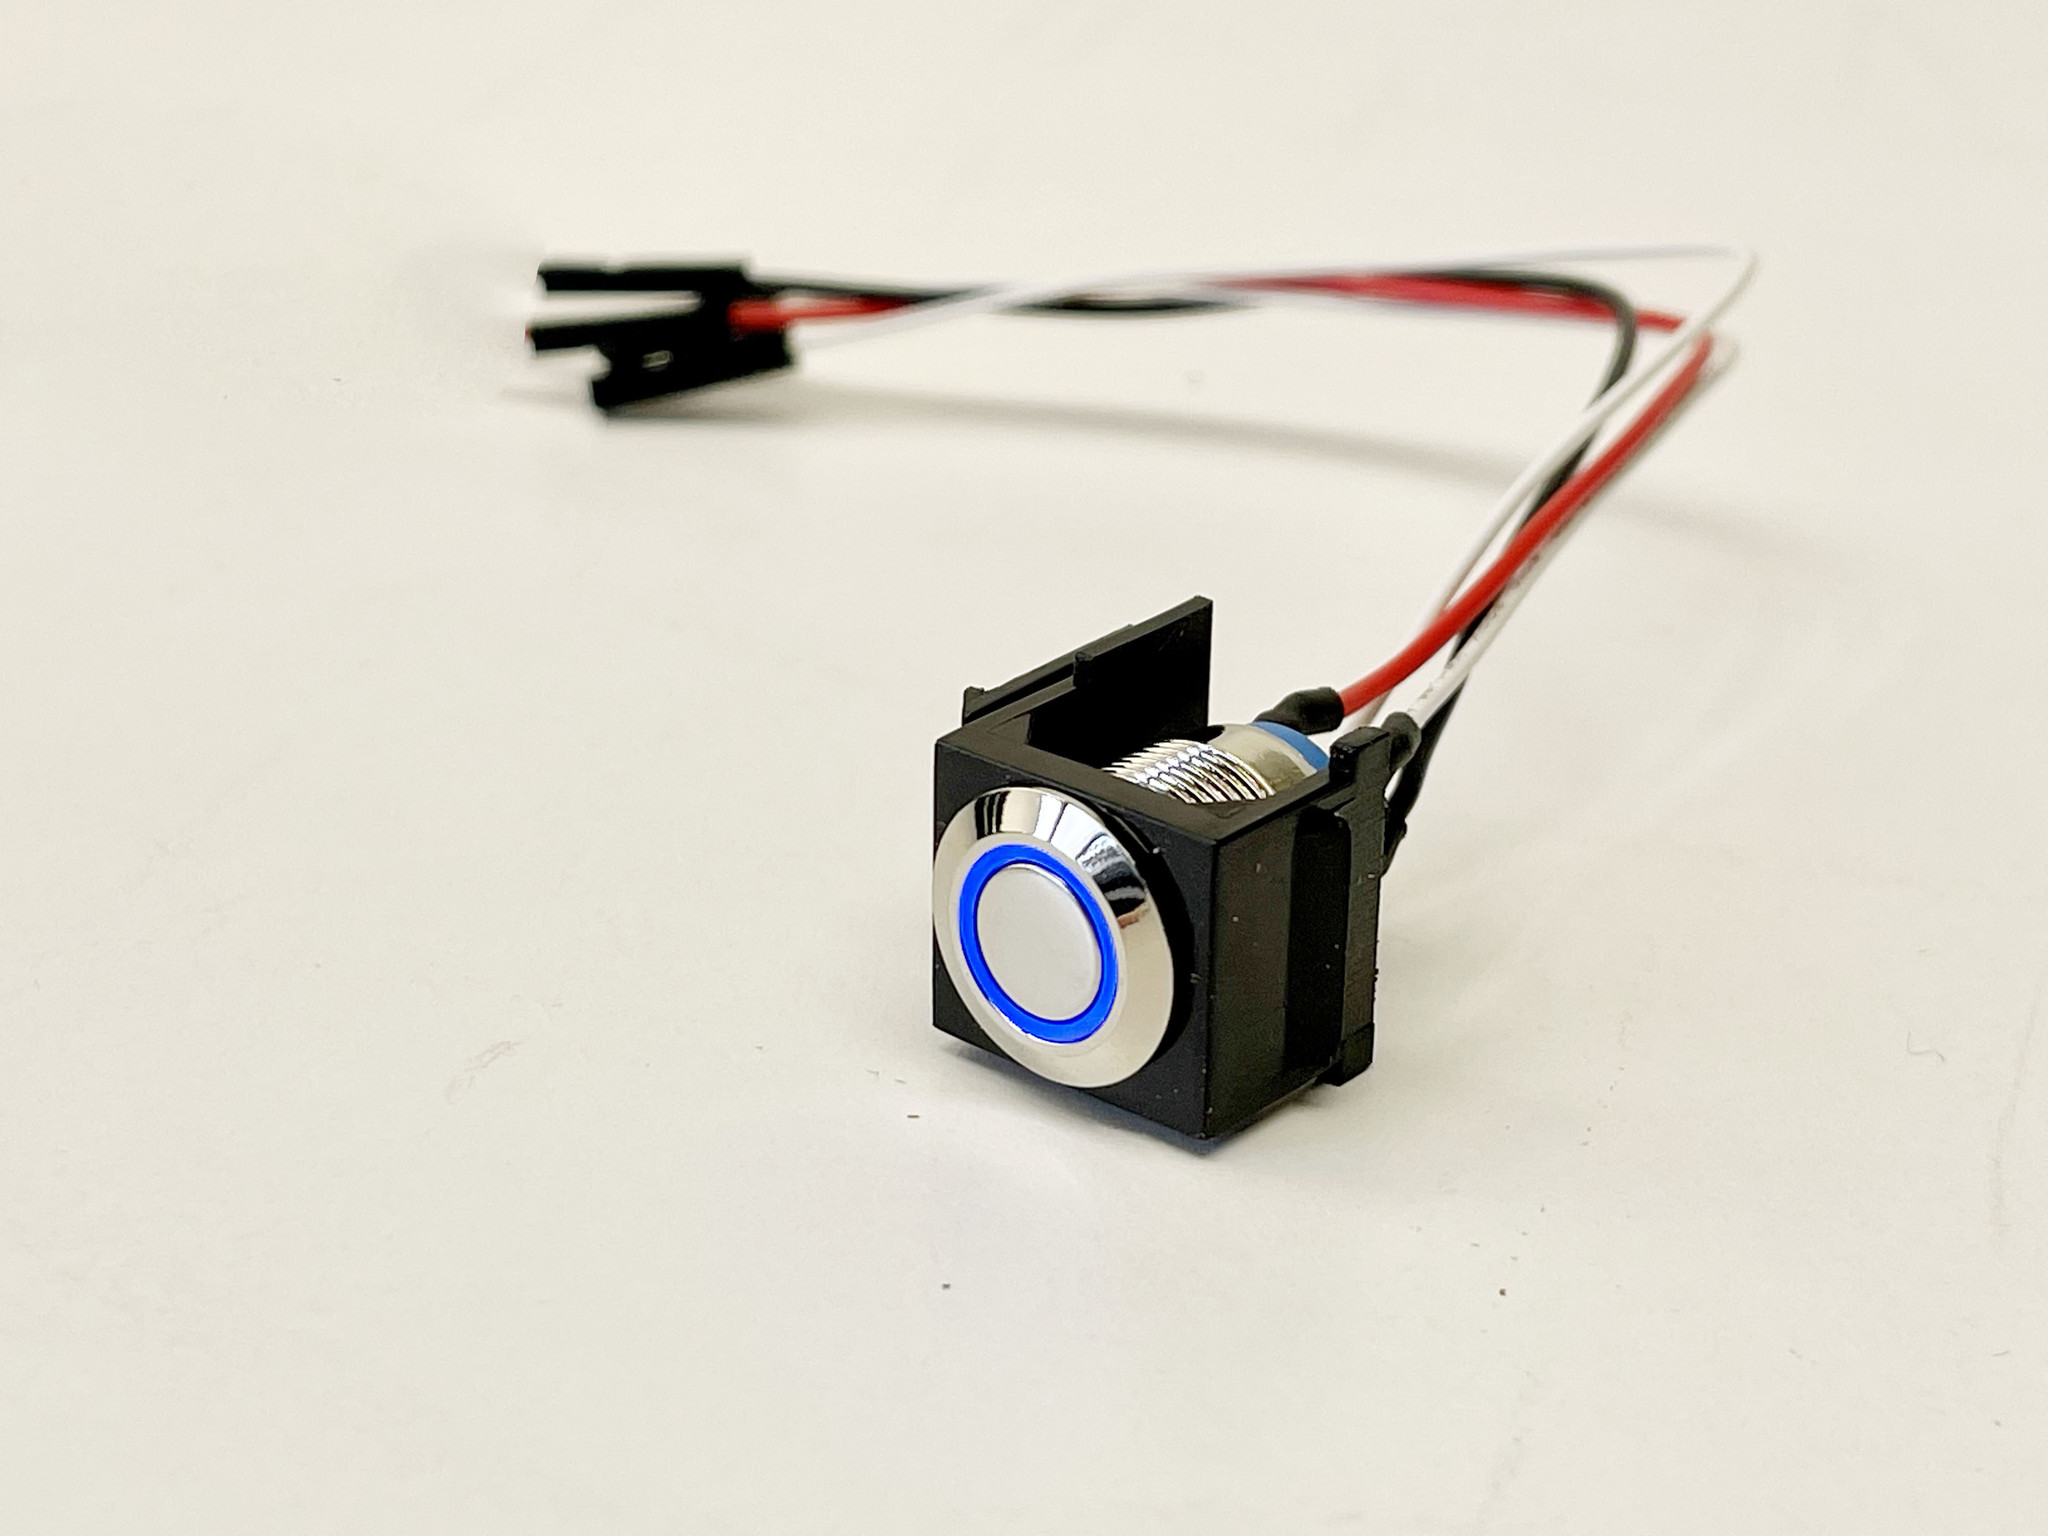 Snap-in momentary push button switch with a blue LED ring 3-9V